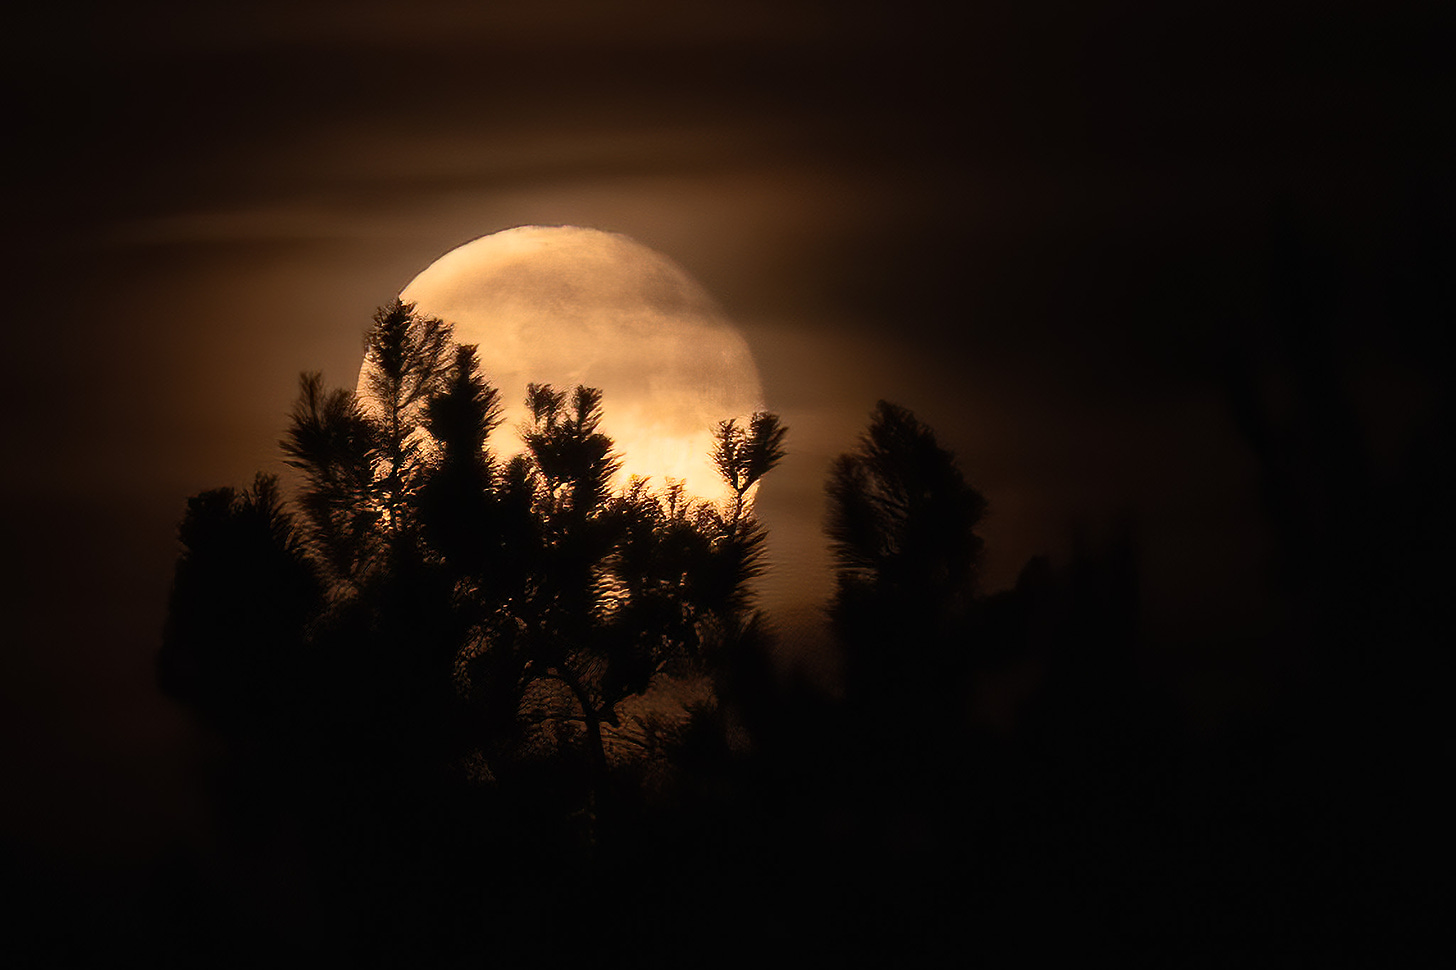 A large full moon rising behind the tree tops.